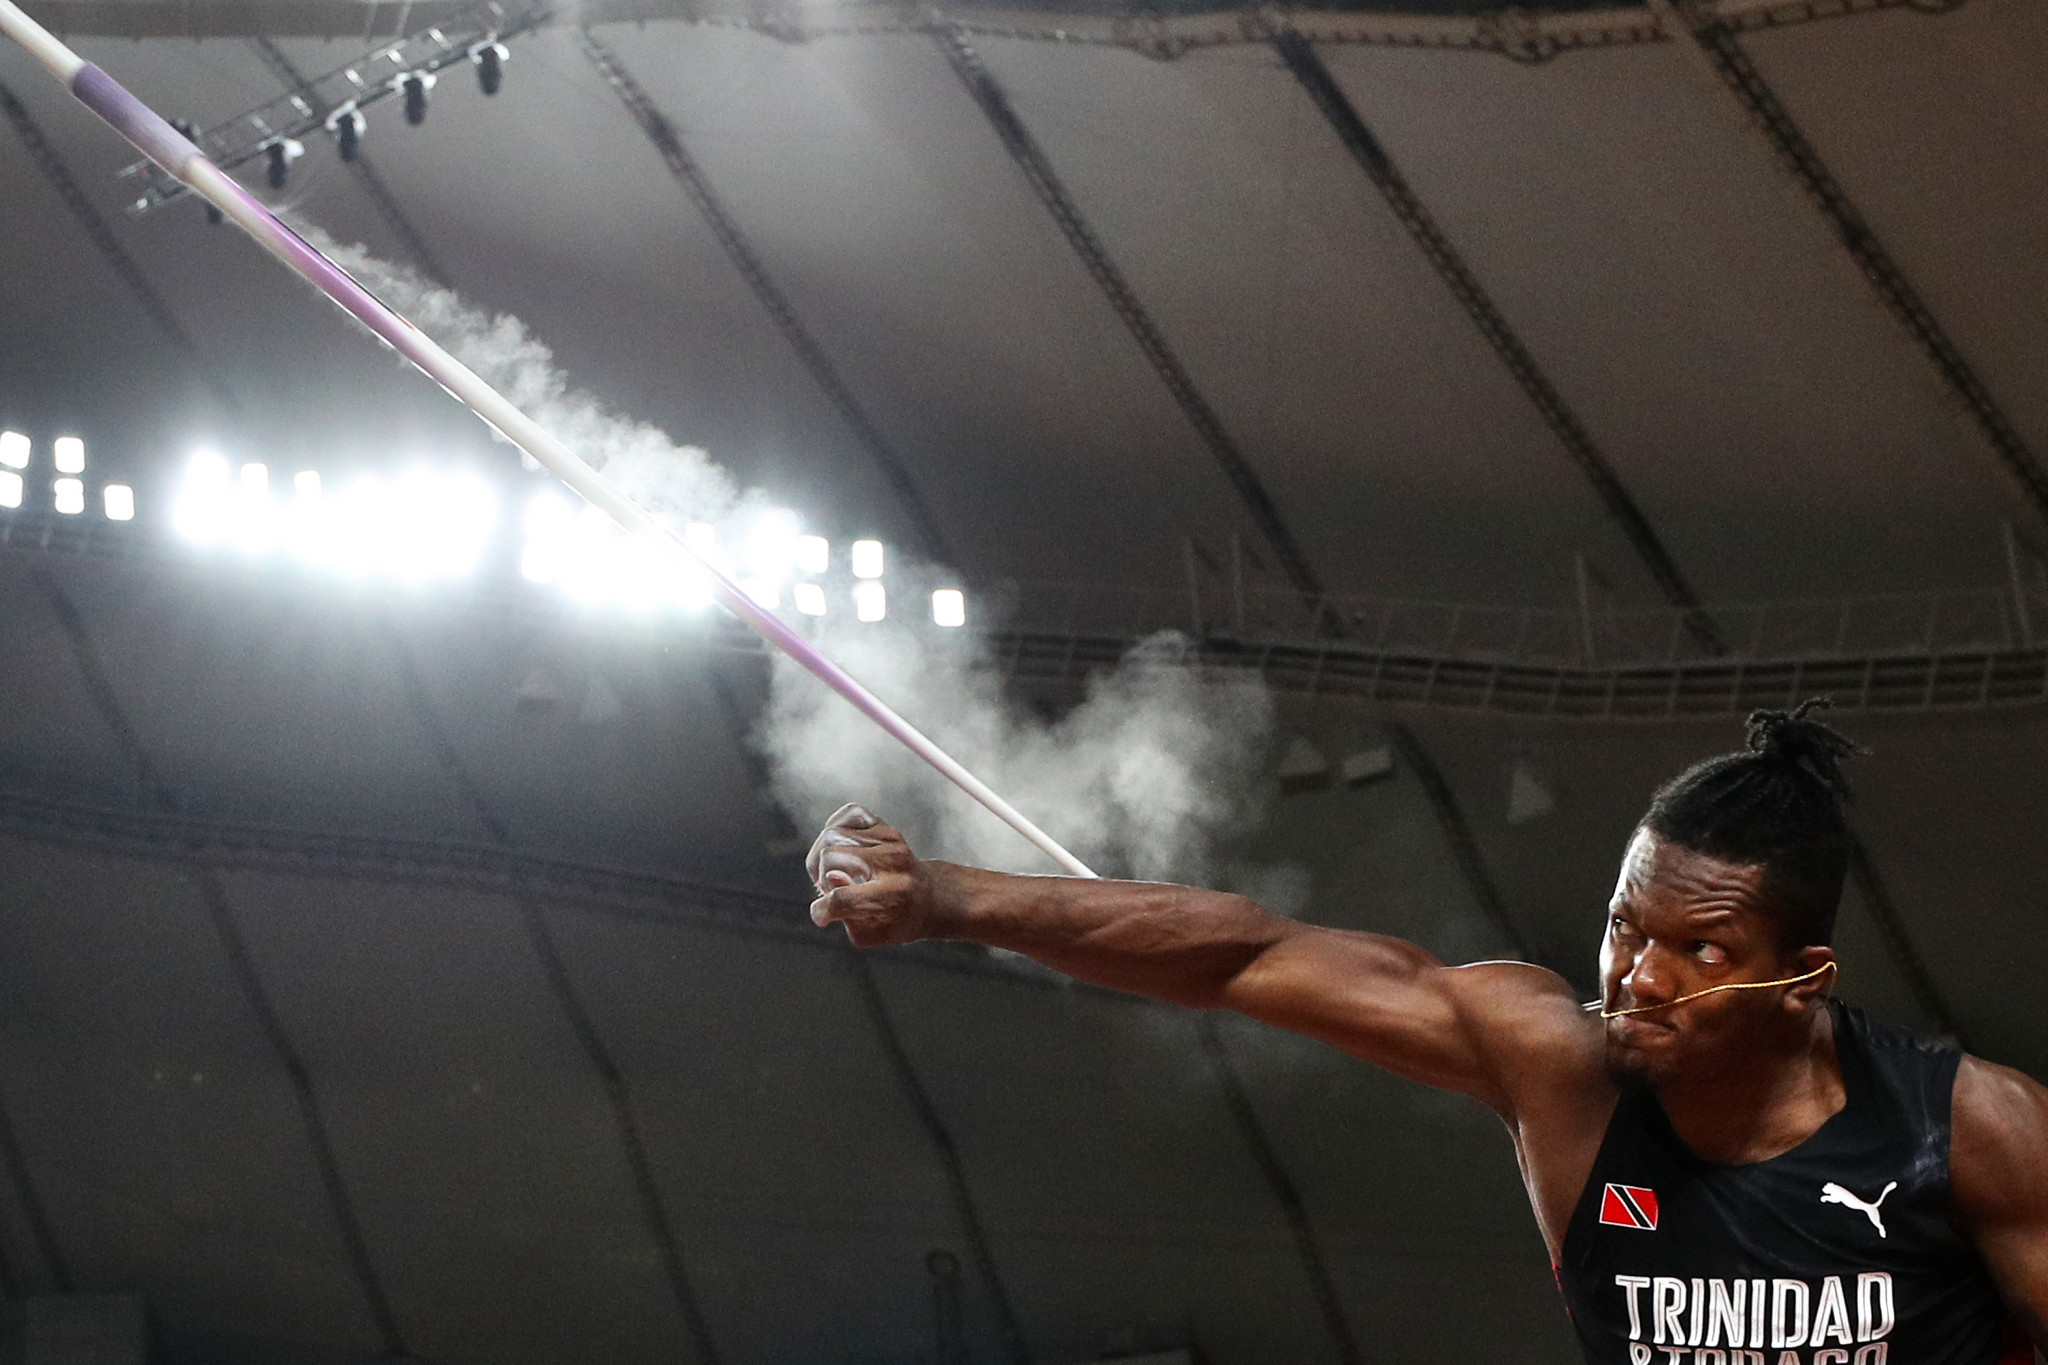 Keshorn Walcott won gold in the javelin at the London 2012 Olympics ©Getty Images